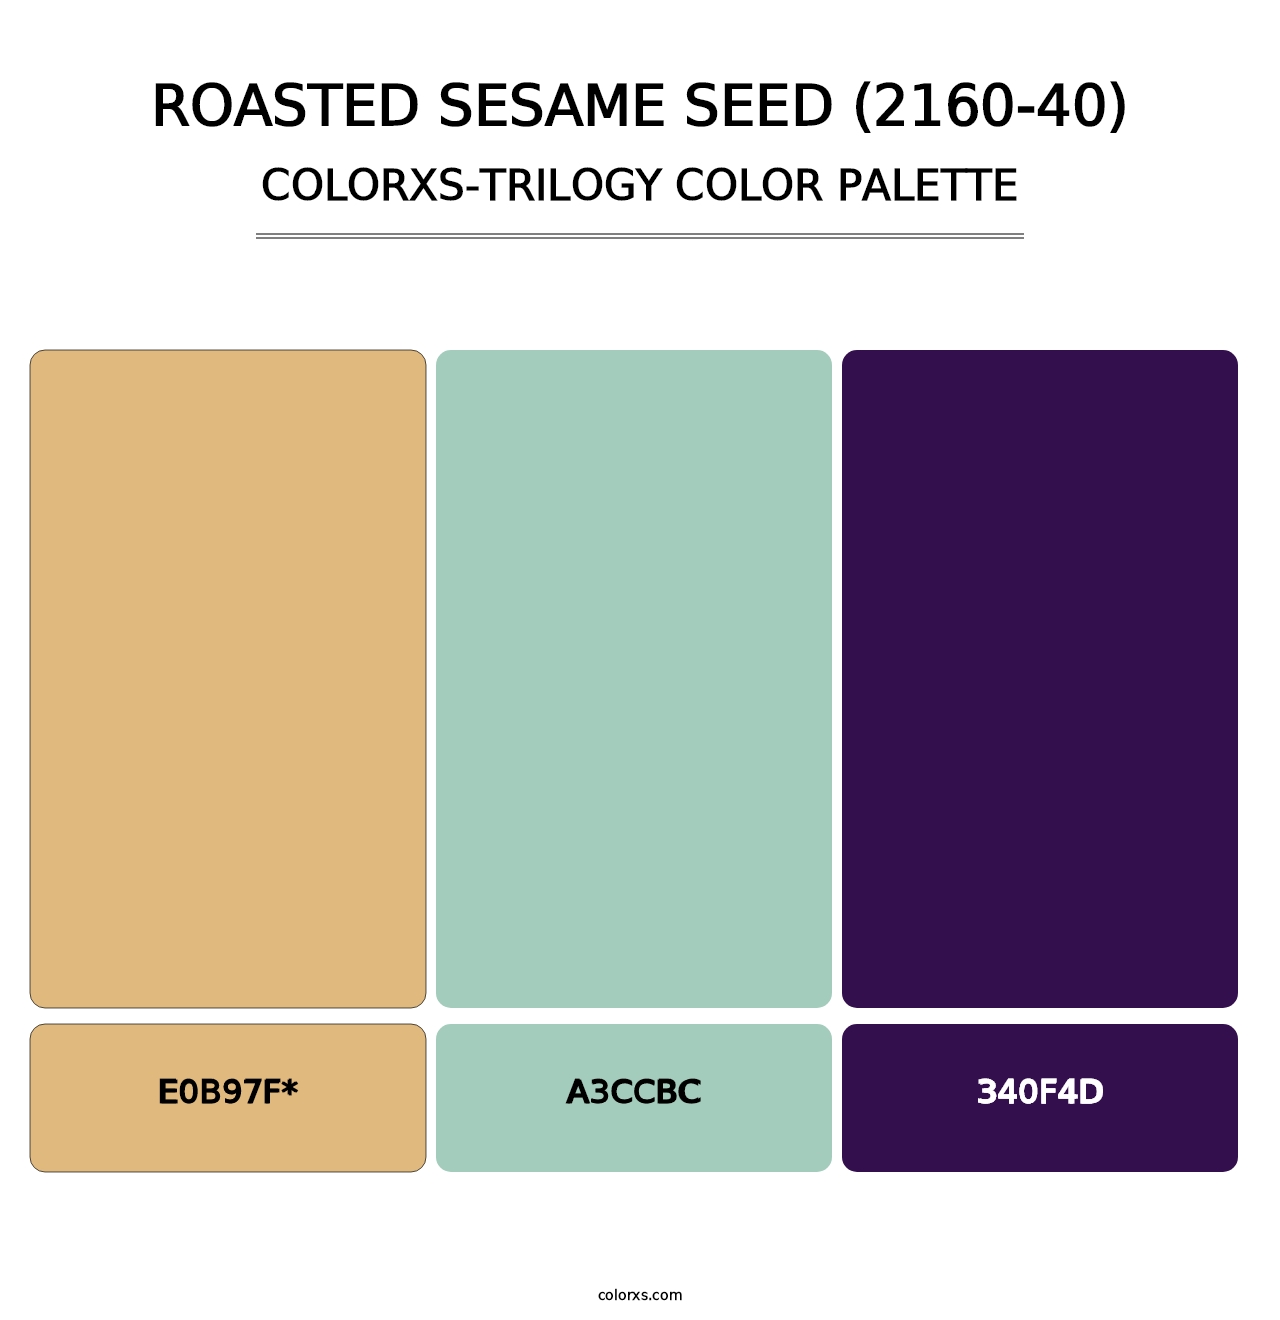 Roasted Sesame Seed (2160-40) - Colorxs Trilogy Palette